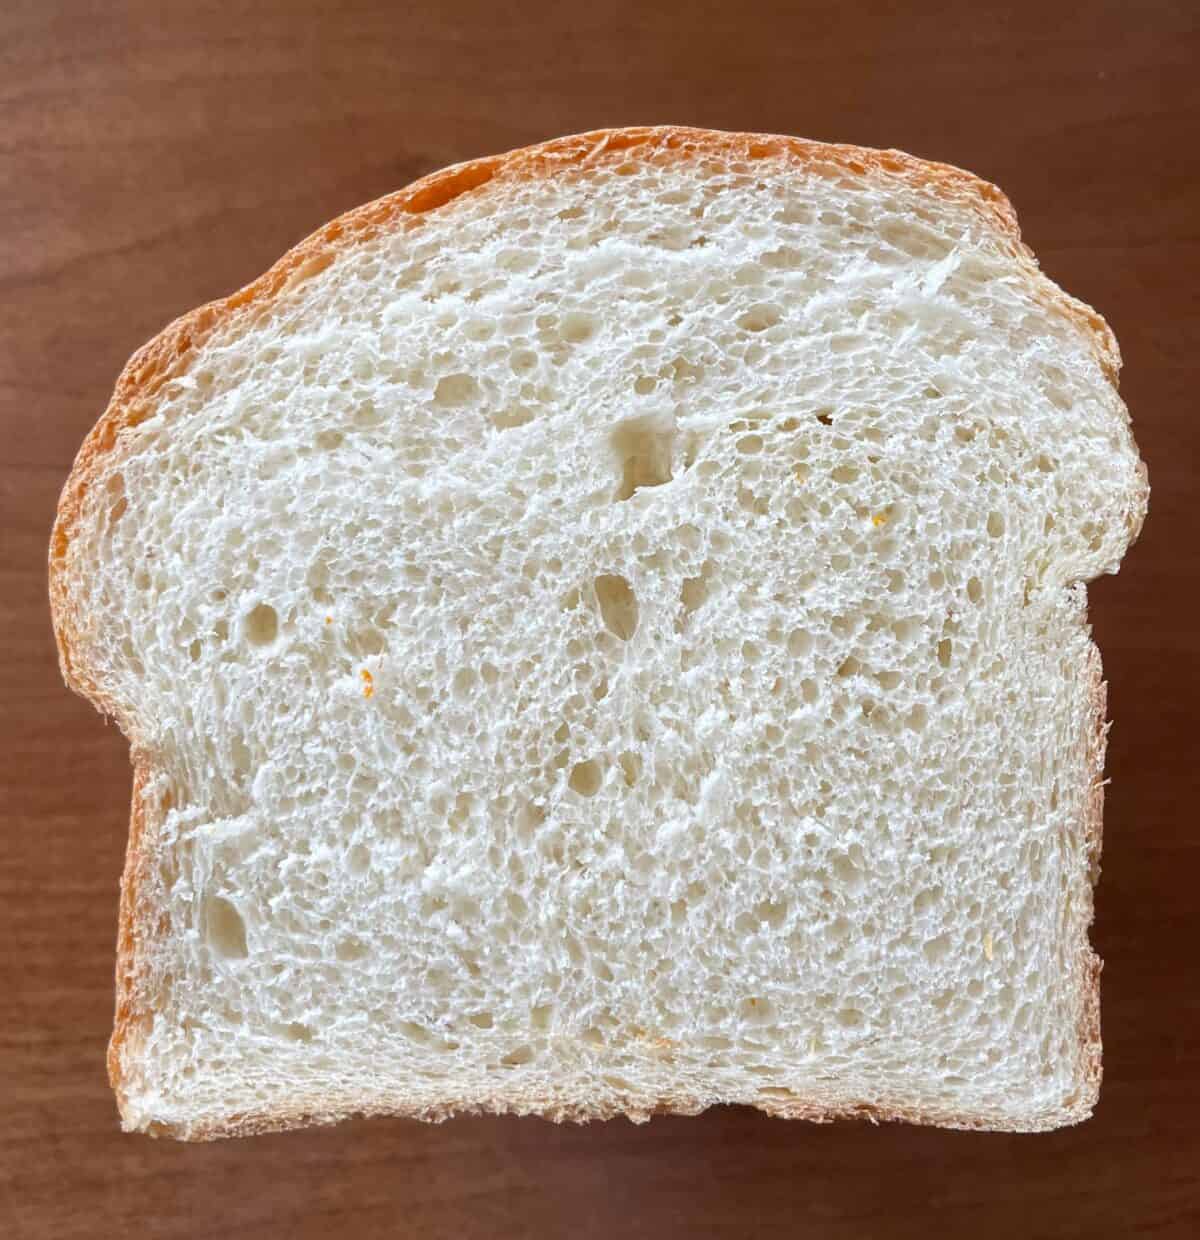 slice of Portuguese sweet bread showing the crumb.